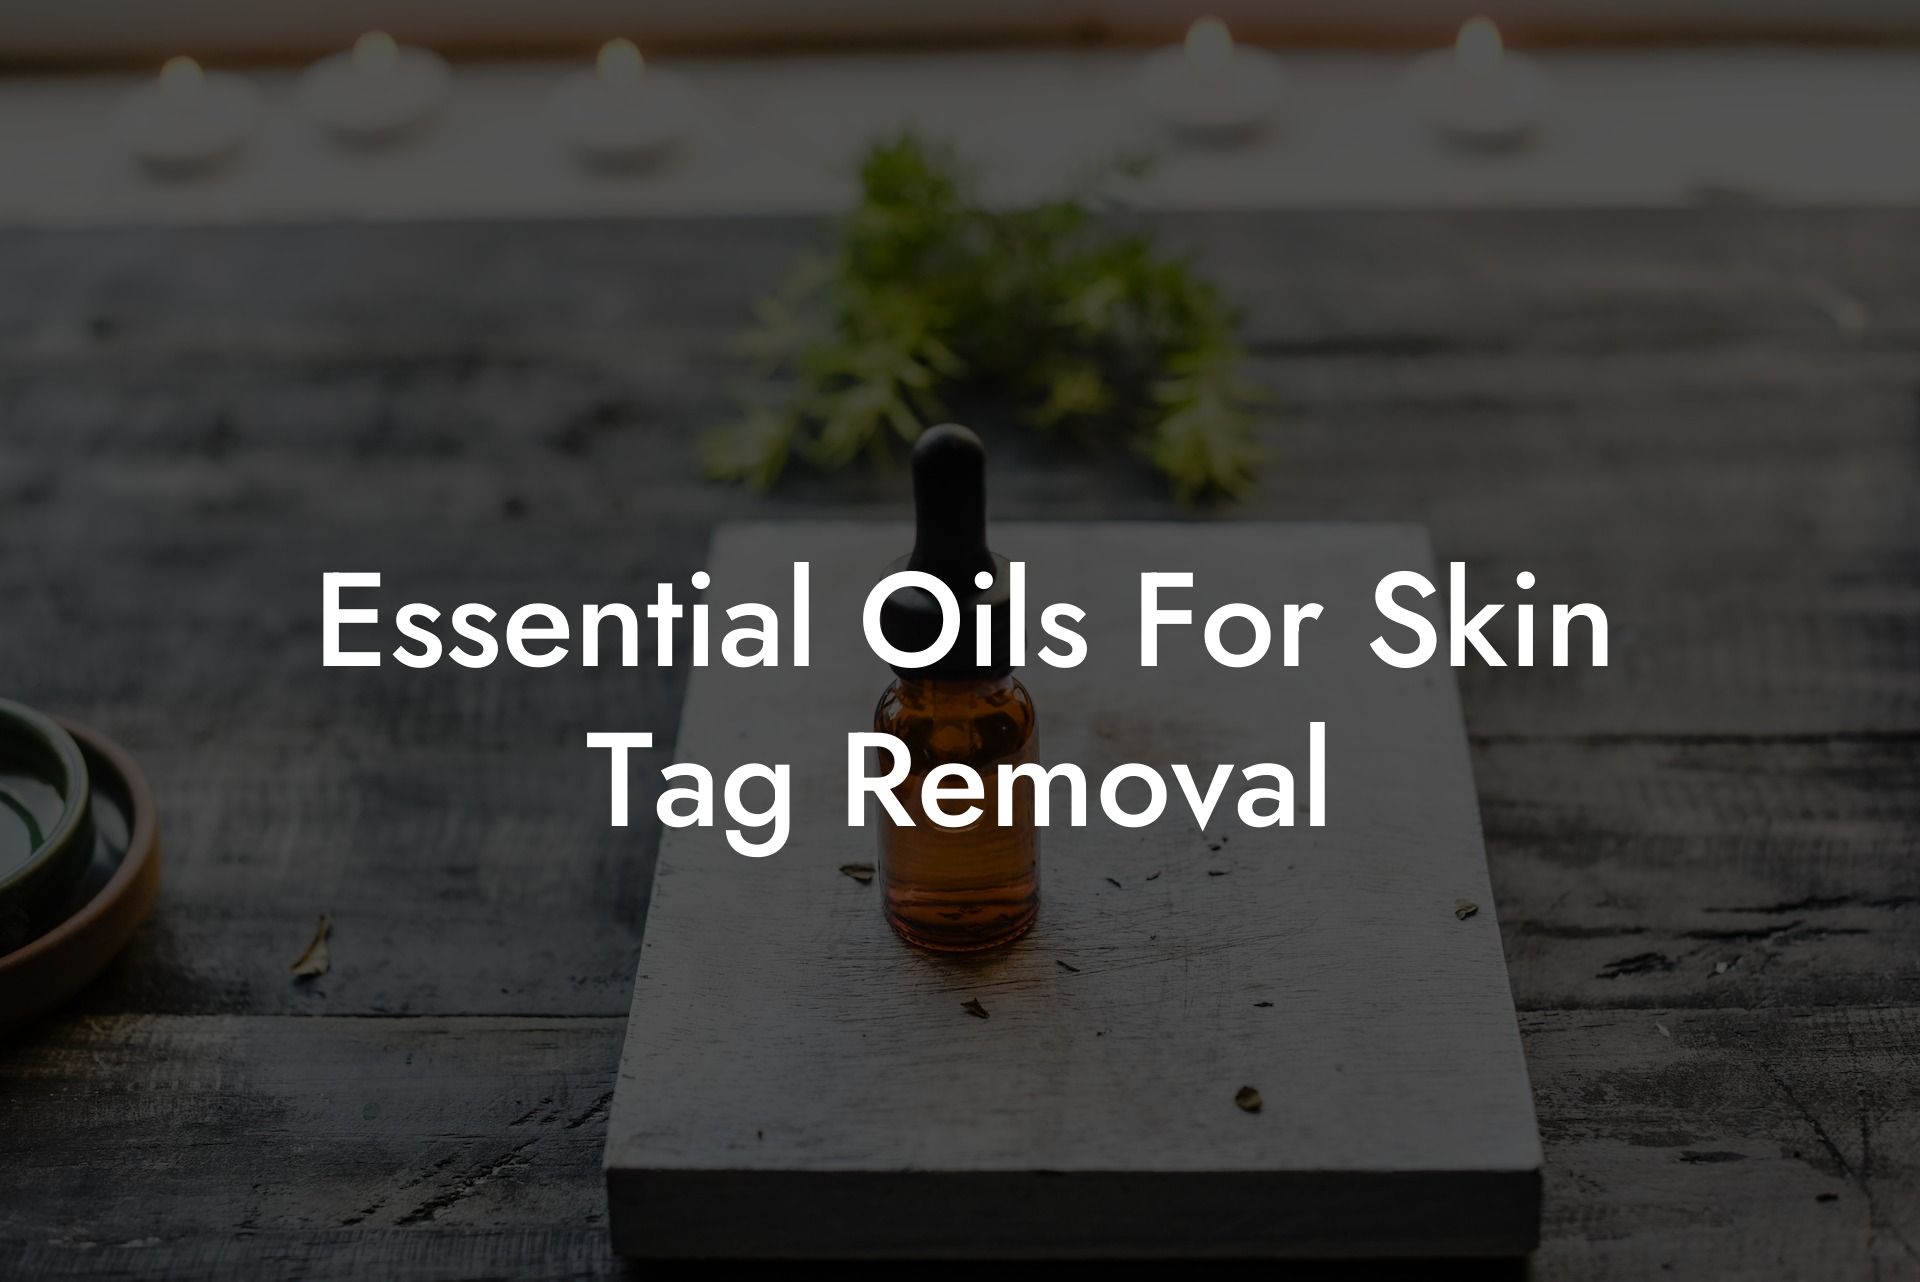 Essential Oils For Skin Tag Removal